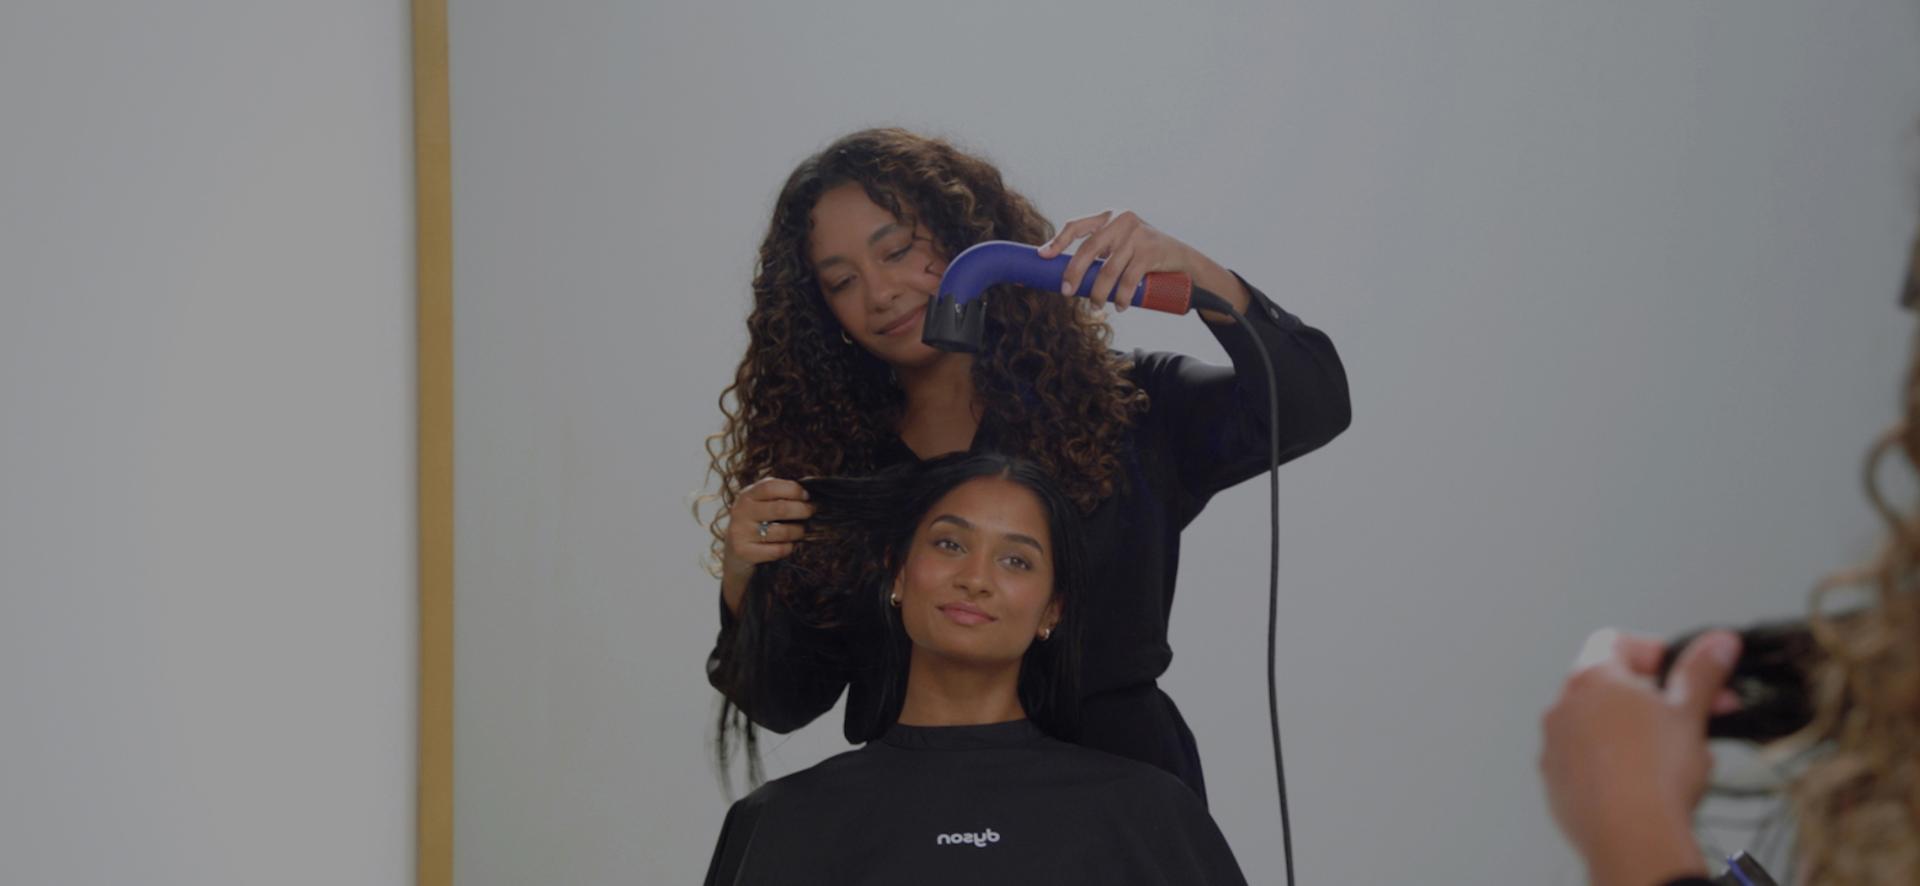 Dyson Global Styling Ambassador drying hair with the Dyson Supersonic r Professional hair dryer.